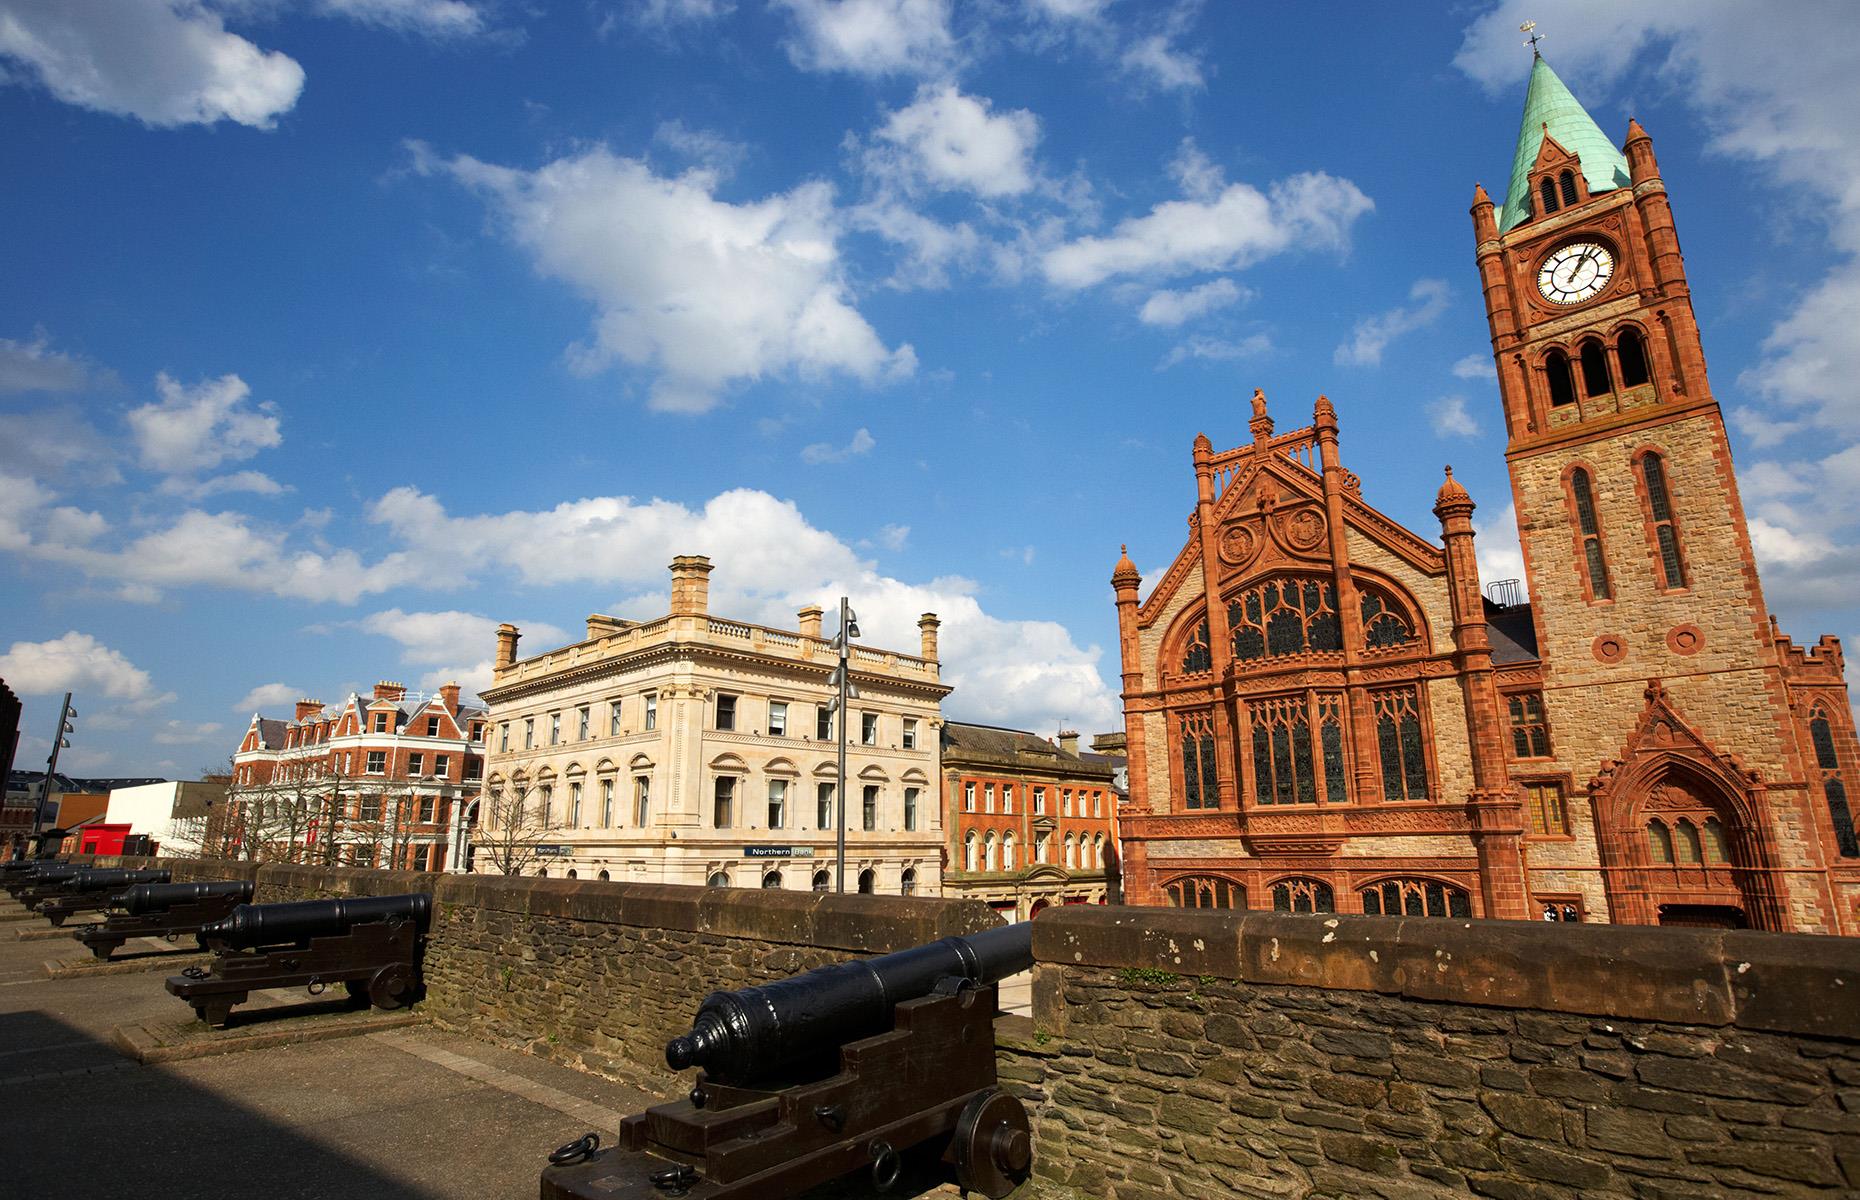 <p>In the historic walled city of Derry/Londonderry, you’ll have the chance to experience all that the inaugural UK City of Culture has to offer. The best way to do this is to take a tour of the city walls themselves.</p>  <p>Join a <a href="https://www.derrycitytours.com/">City Walking Tour</a> for an engaging, unbiased journey through Derry/Londonderry's history, from its Christian settlement in the 6<sup>th</sup> century, up through the Troubles including Bloody Sunday, to its current reputation as a seat of music, hospitality and peace.</p>